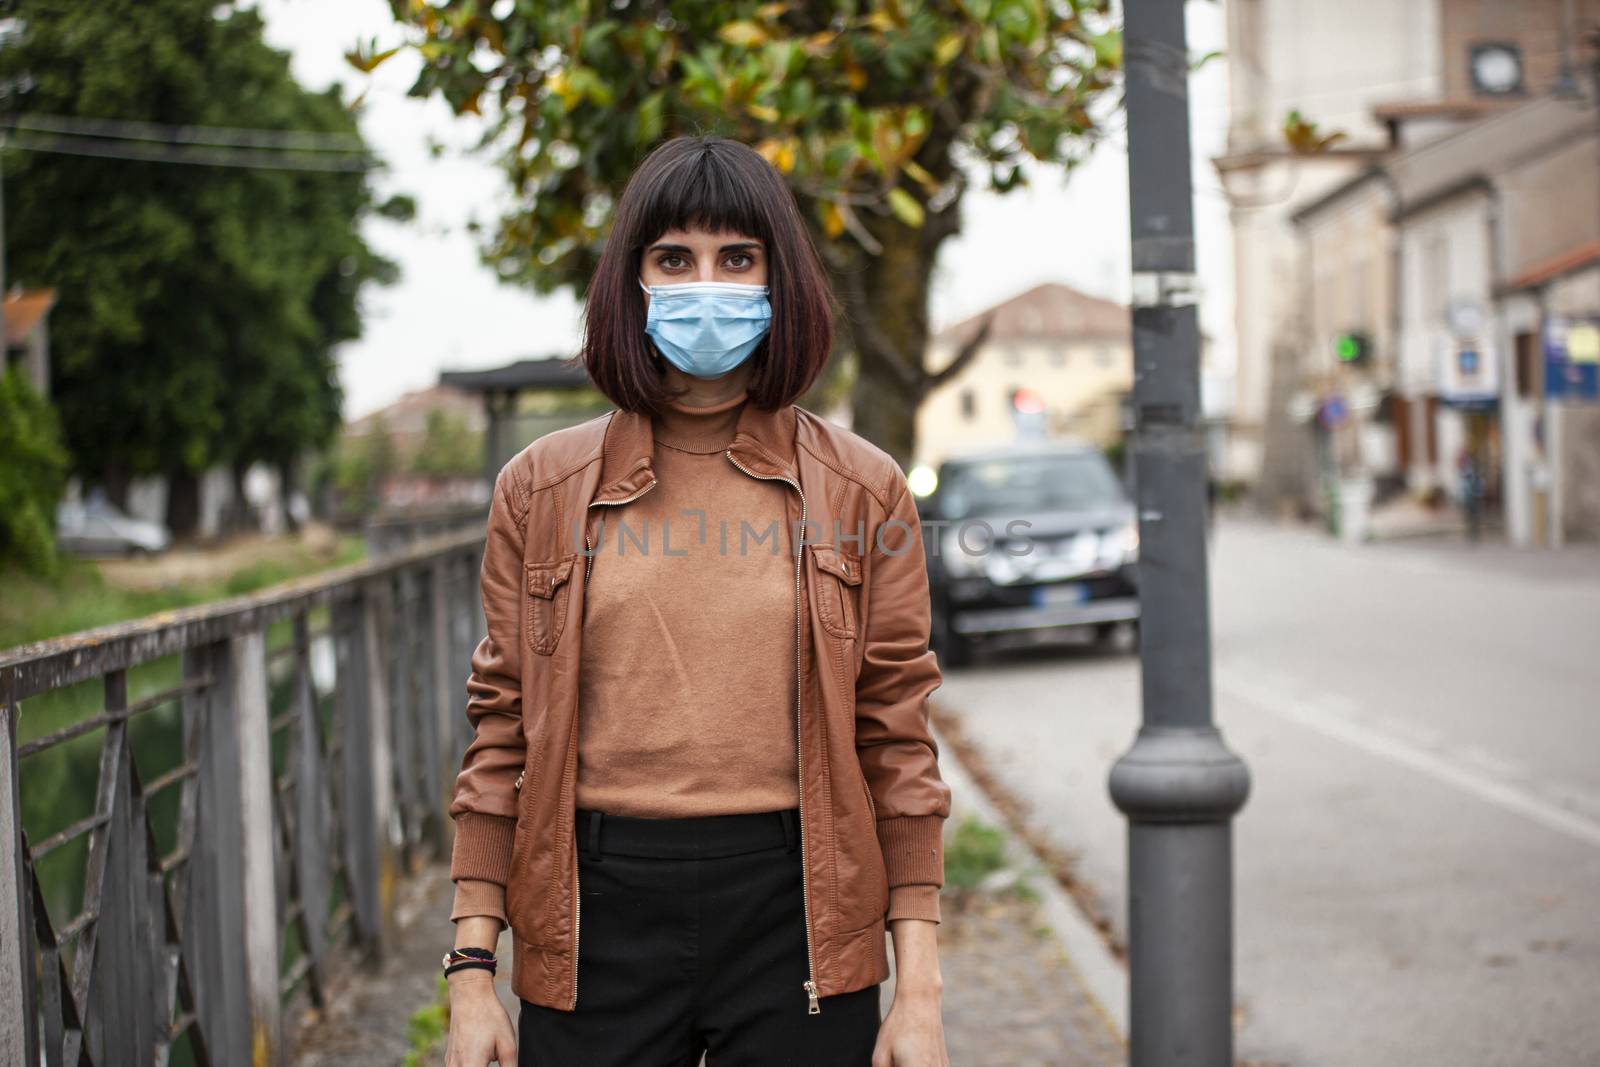 Portrait of a Girl with medical mask outdoor during covid quarantine in Italy